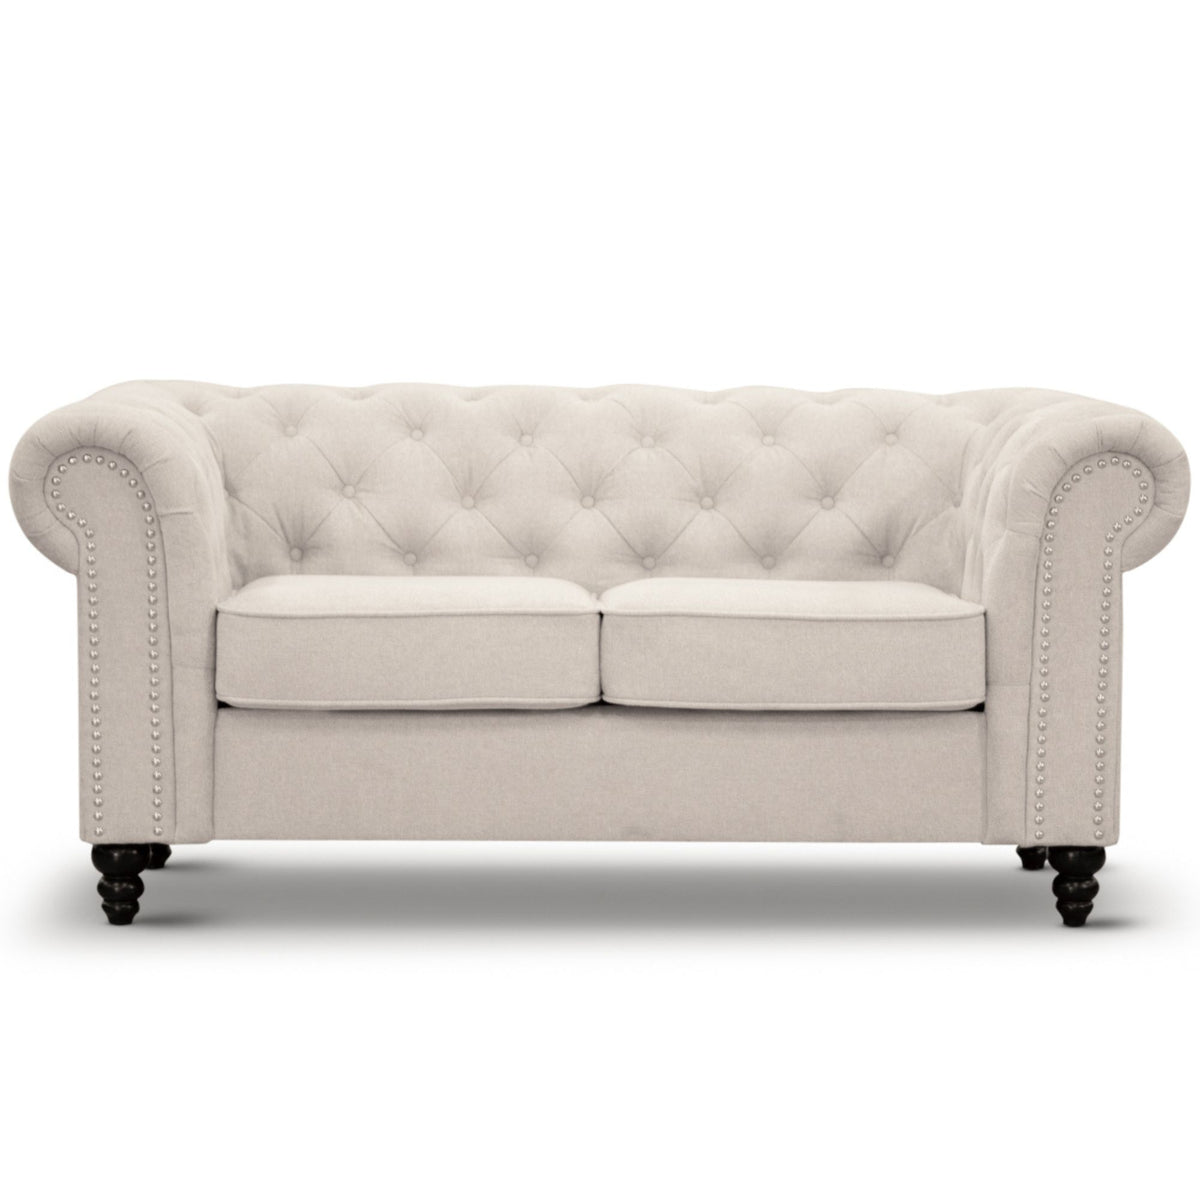 Kiho Chesterfield Fabric Upholstered 2 Seater Sofa  - Beige - Notbrand